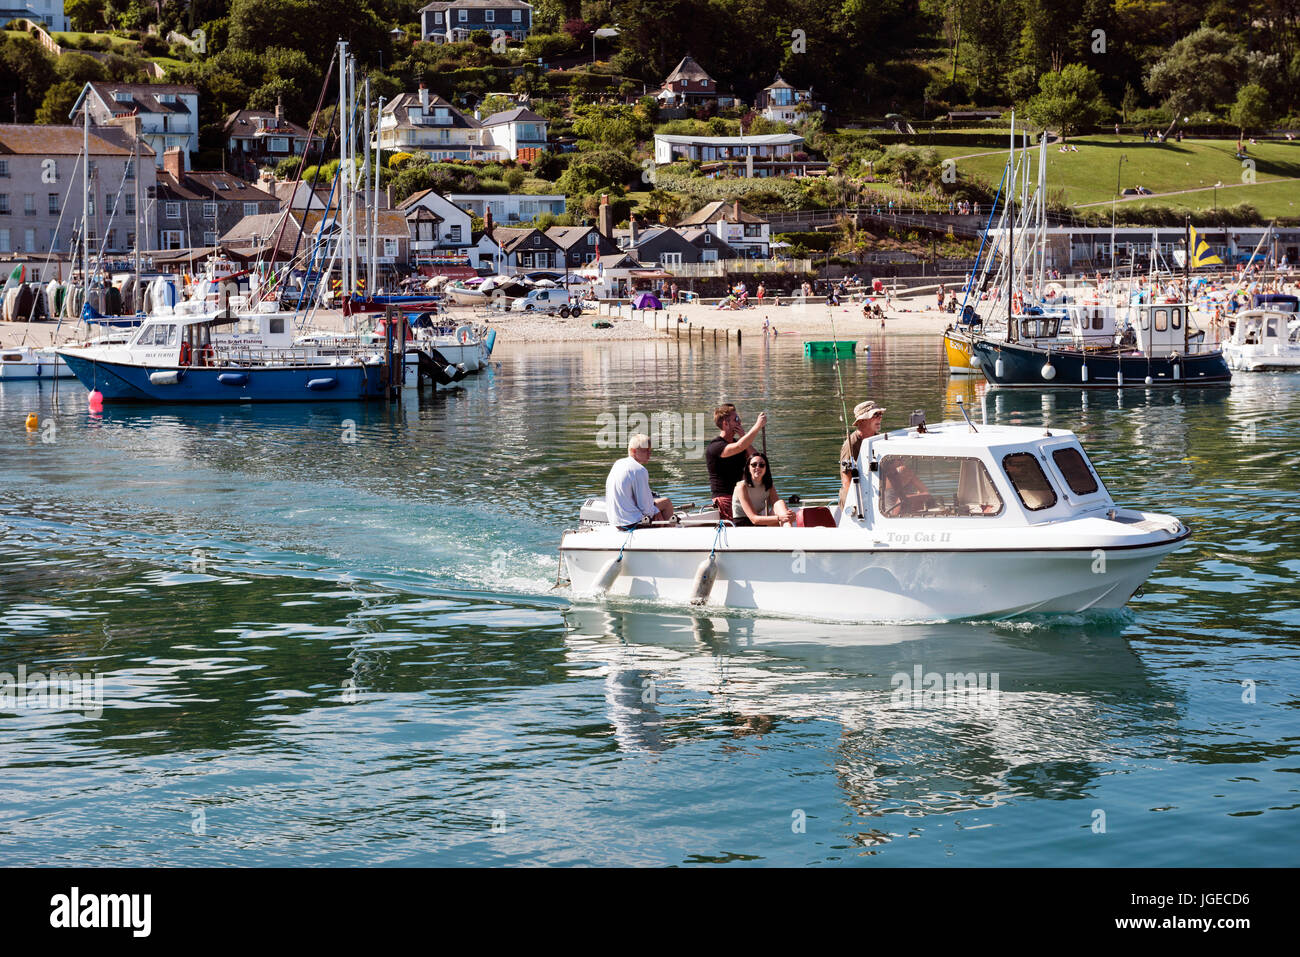 People on a boat at the harbour, Lyme Regis, Dorset, UK. Stock Photo